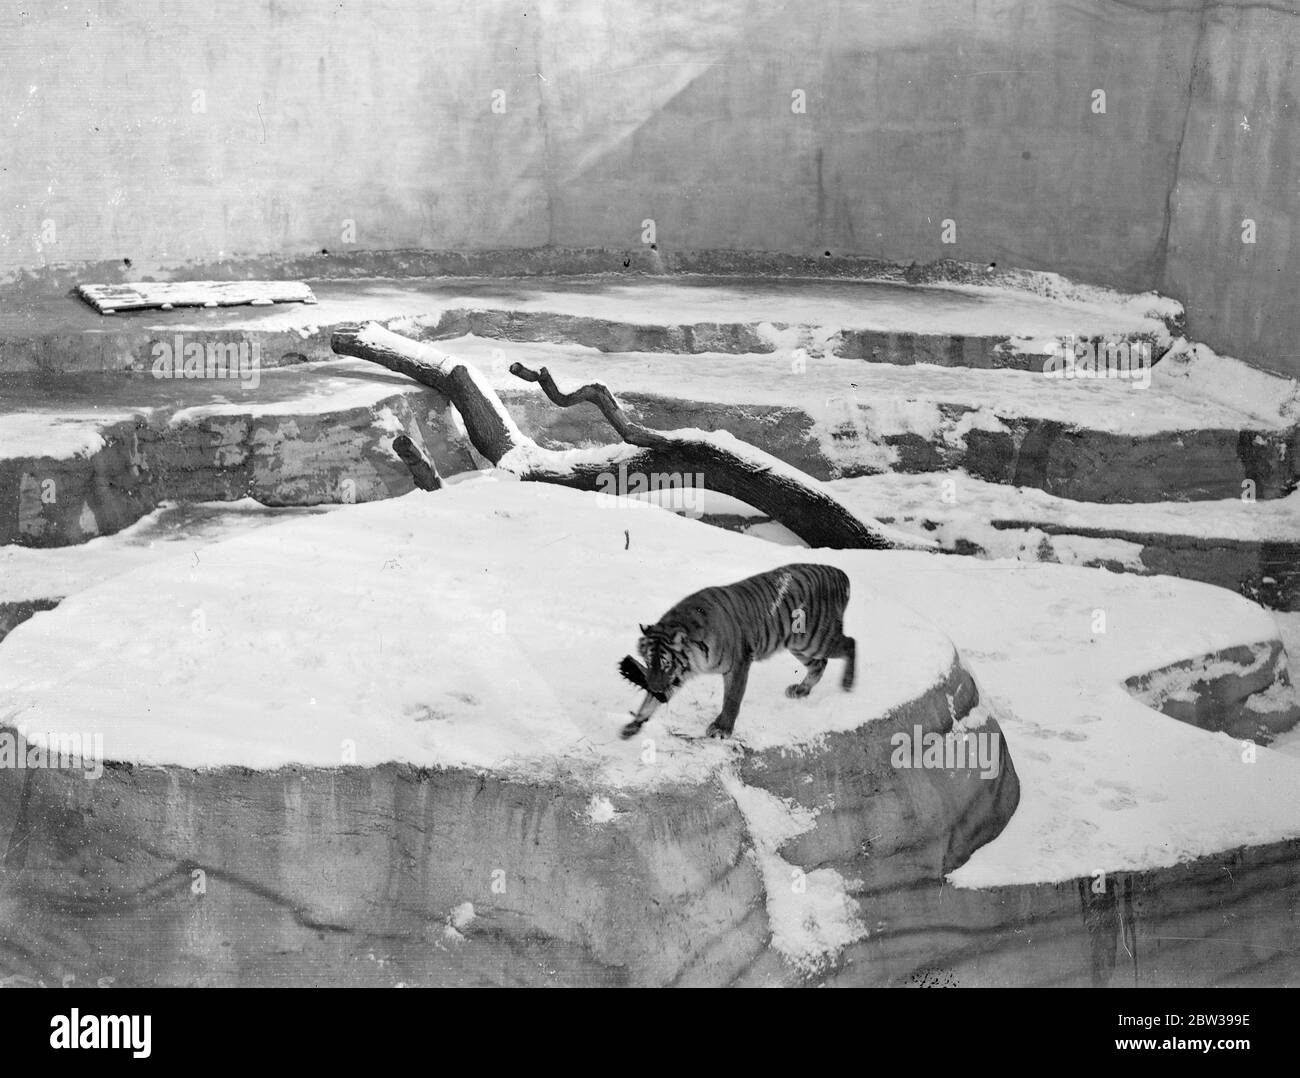 Rani the Whipsnade tiger at play . Rani , the tiger at Whipsnade Zoo , enjoying a game with a brush given him by his keeper , in the snow covered enclosure at Whipsnade . 21 February 1933 3 30s, 30's, 1930s, 1930's, thirties, nineteen thirties Stock Photo